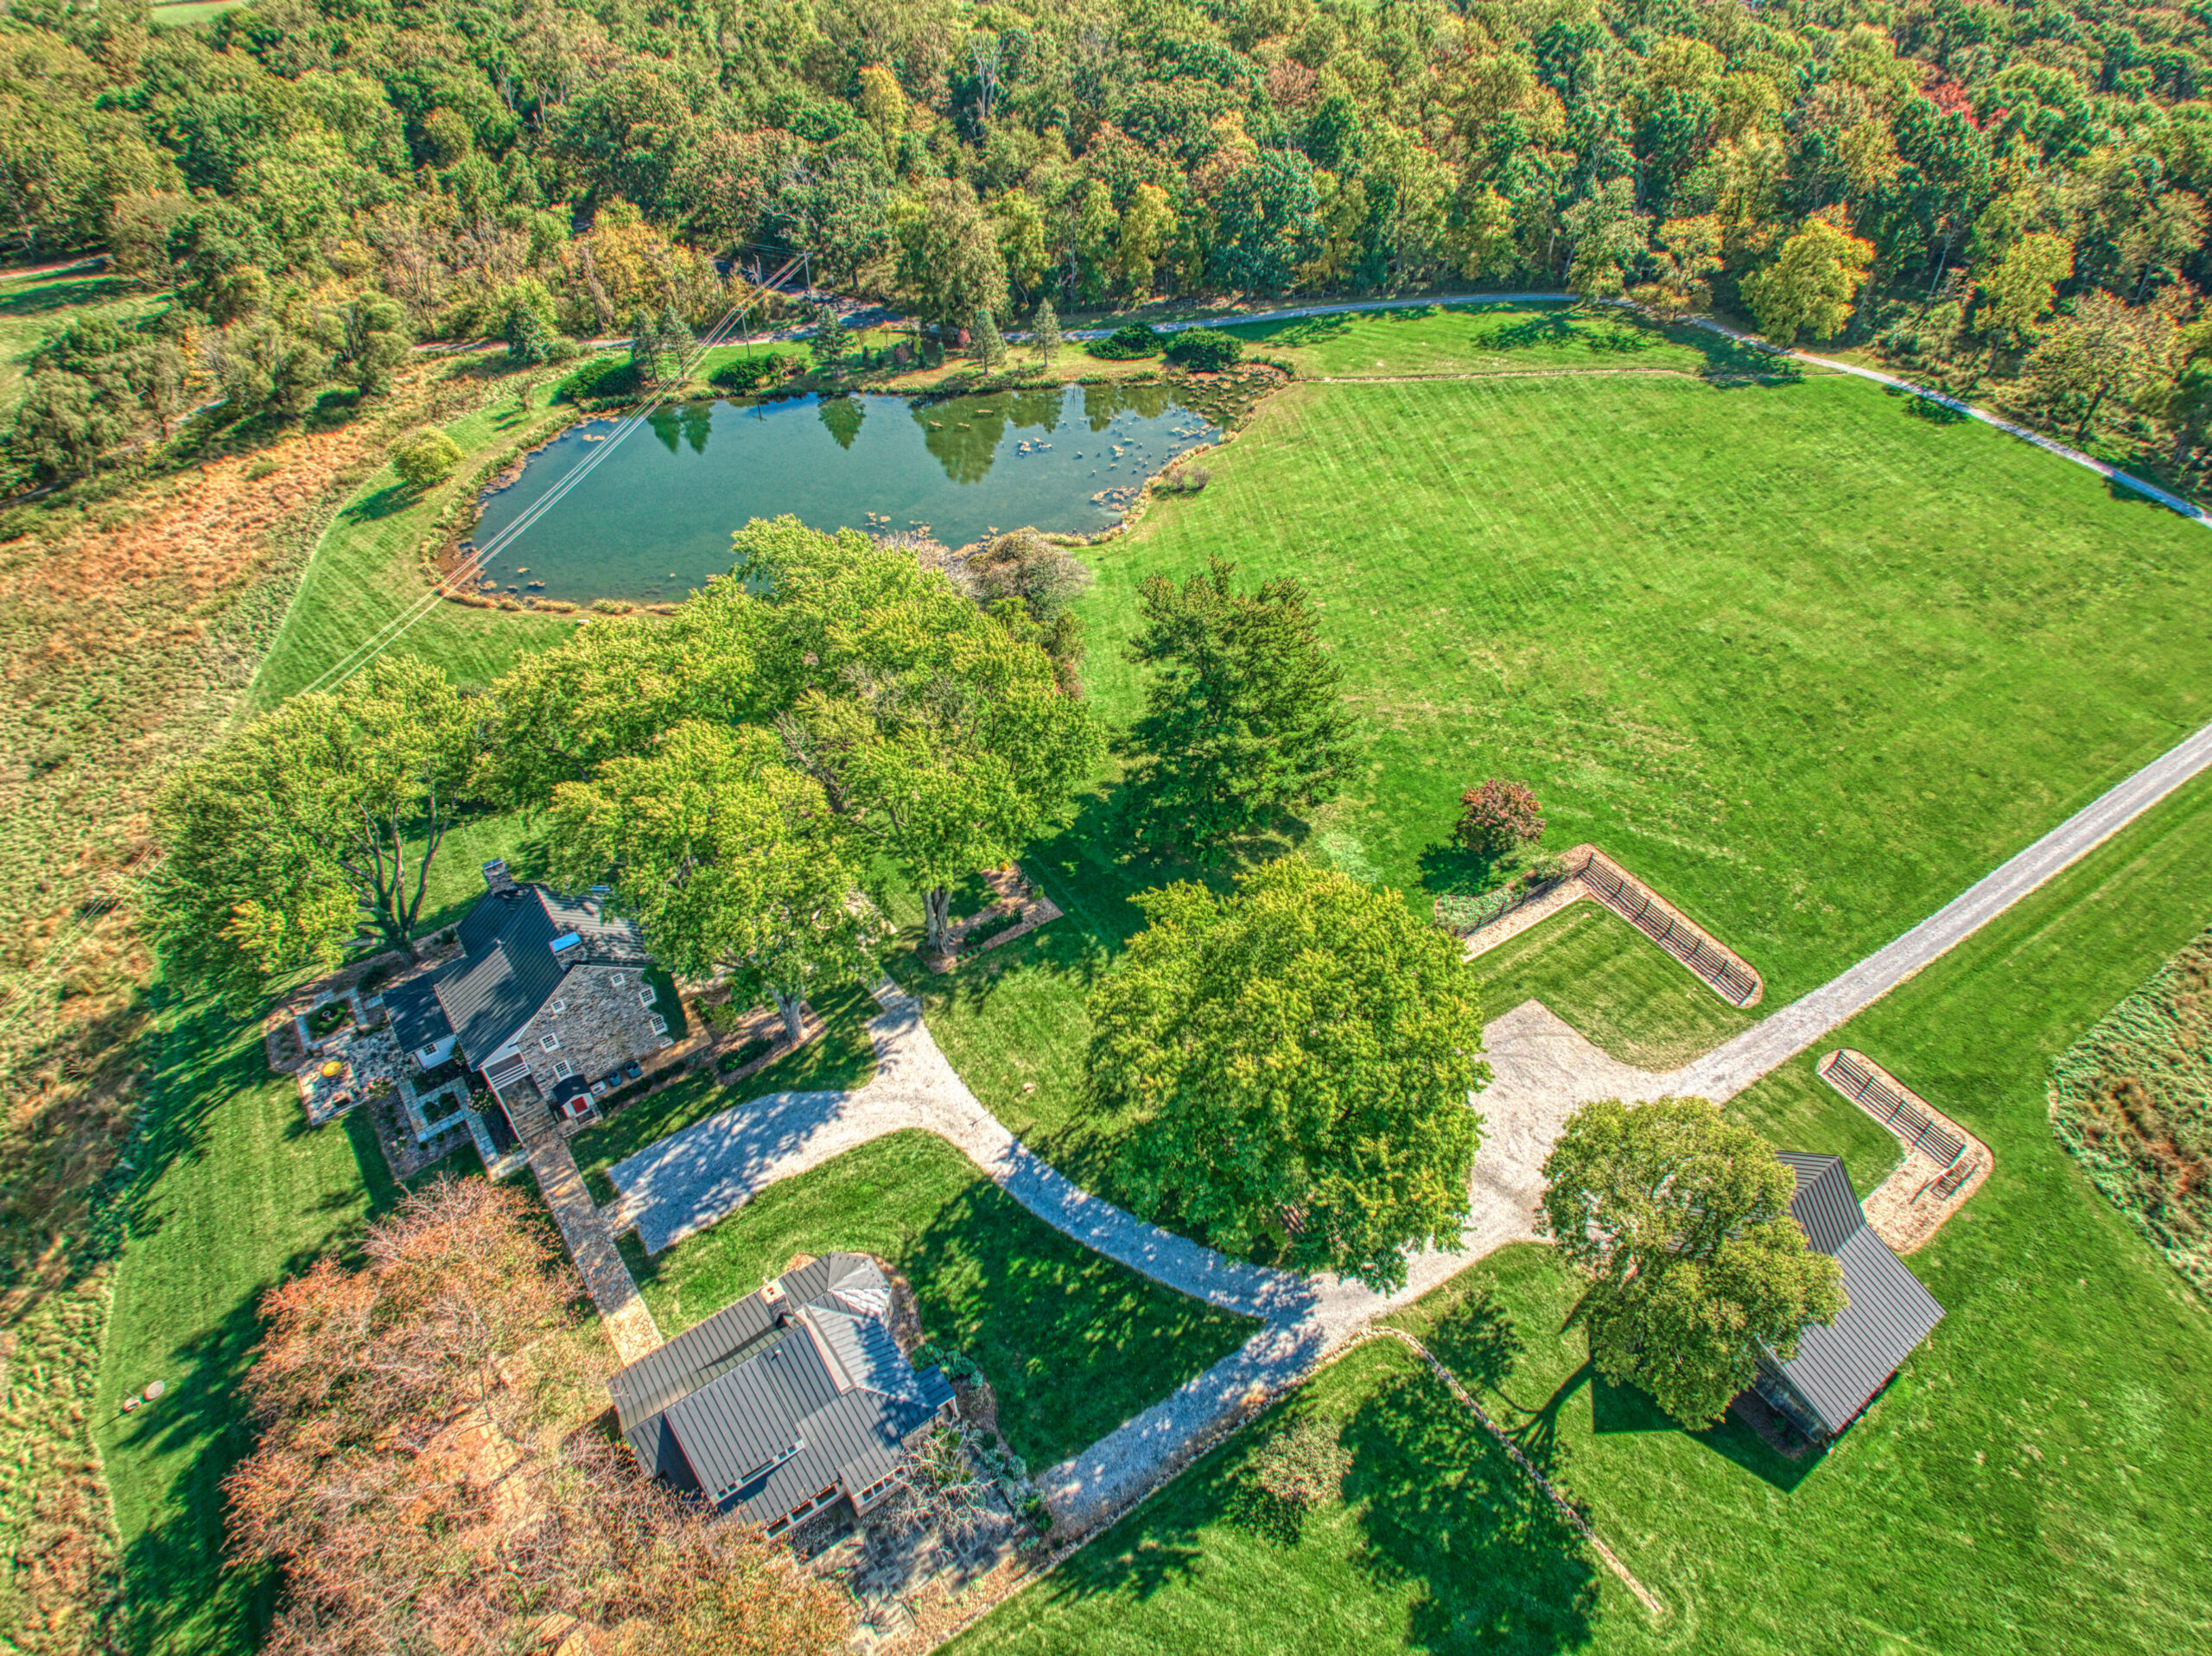 Professional aerial drone photo of Historic Hearthstone Manor: 35428 Appalachian Trail Rd, Round Hill, Virginia - showing 3 individual structures (2 homes and one detached garage), long driveway and large pond